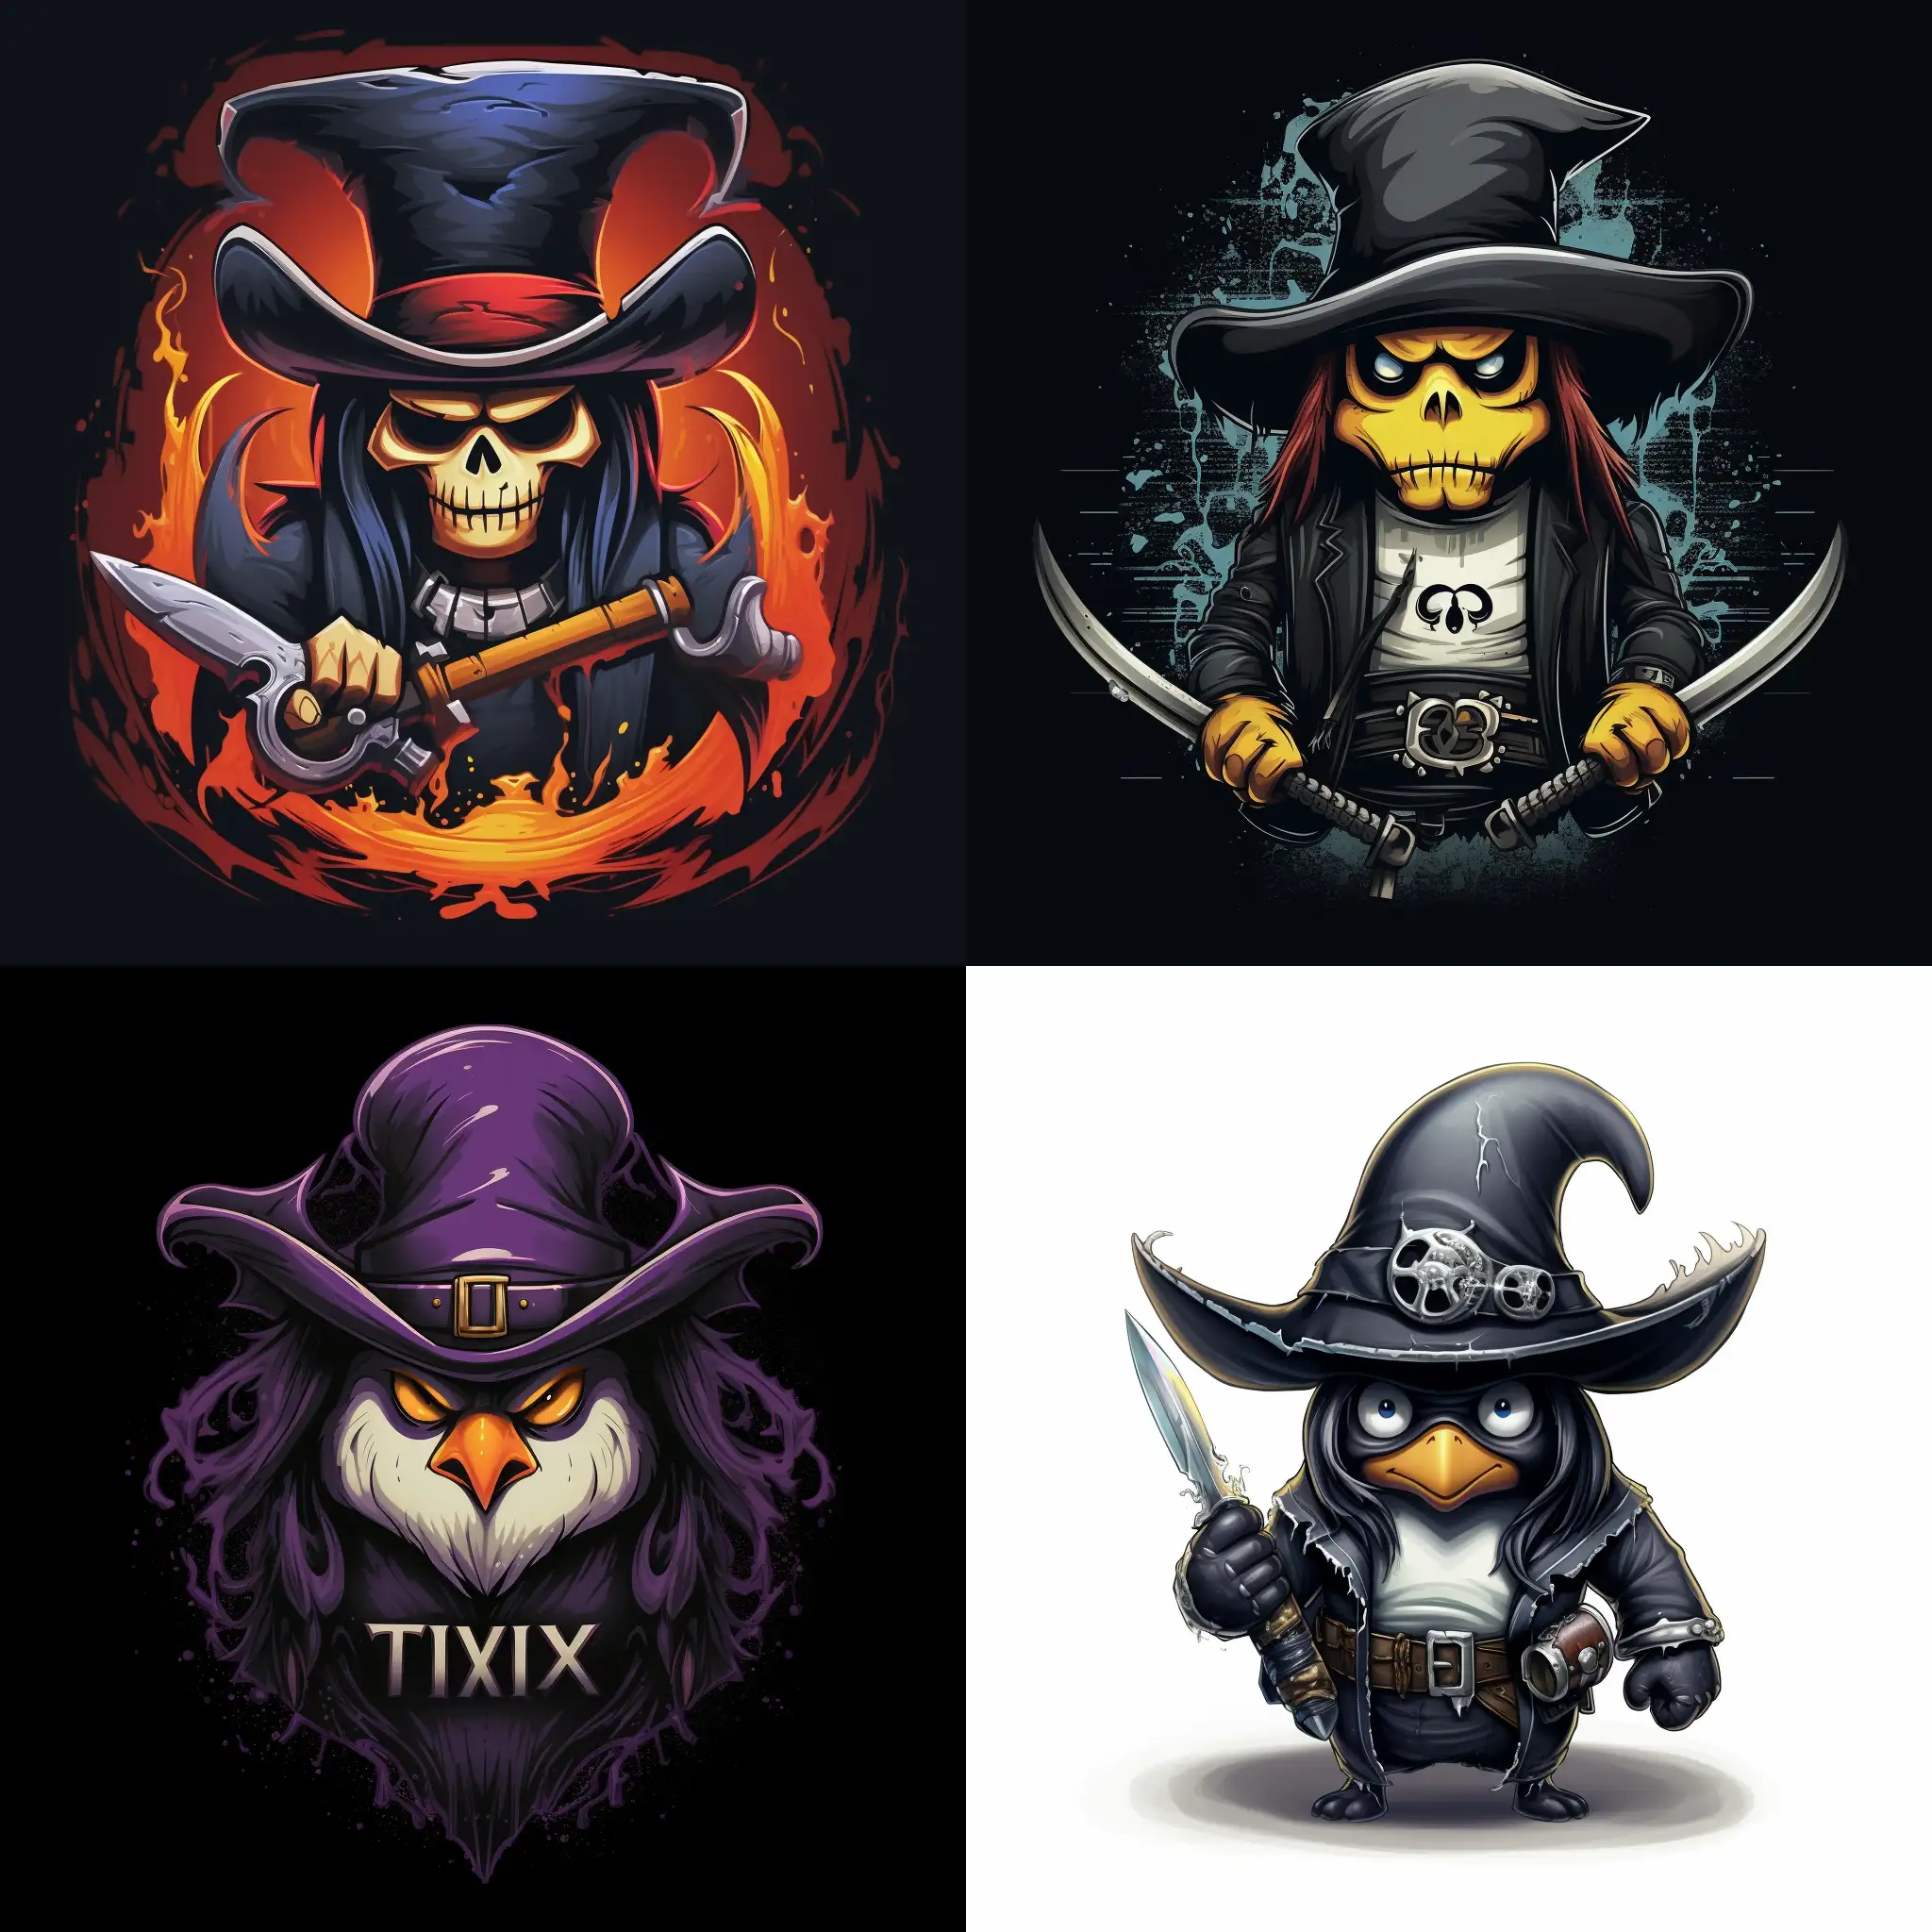 a pirate jolly roger mixed with linux tux Mascot, tech
and wizard touch
